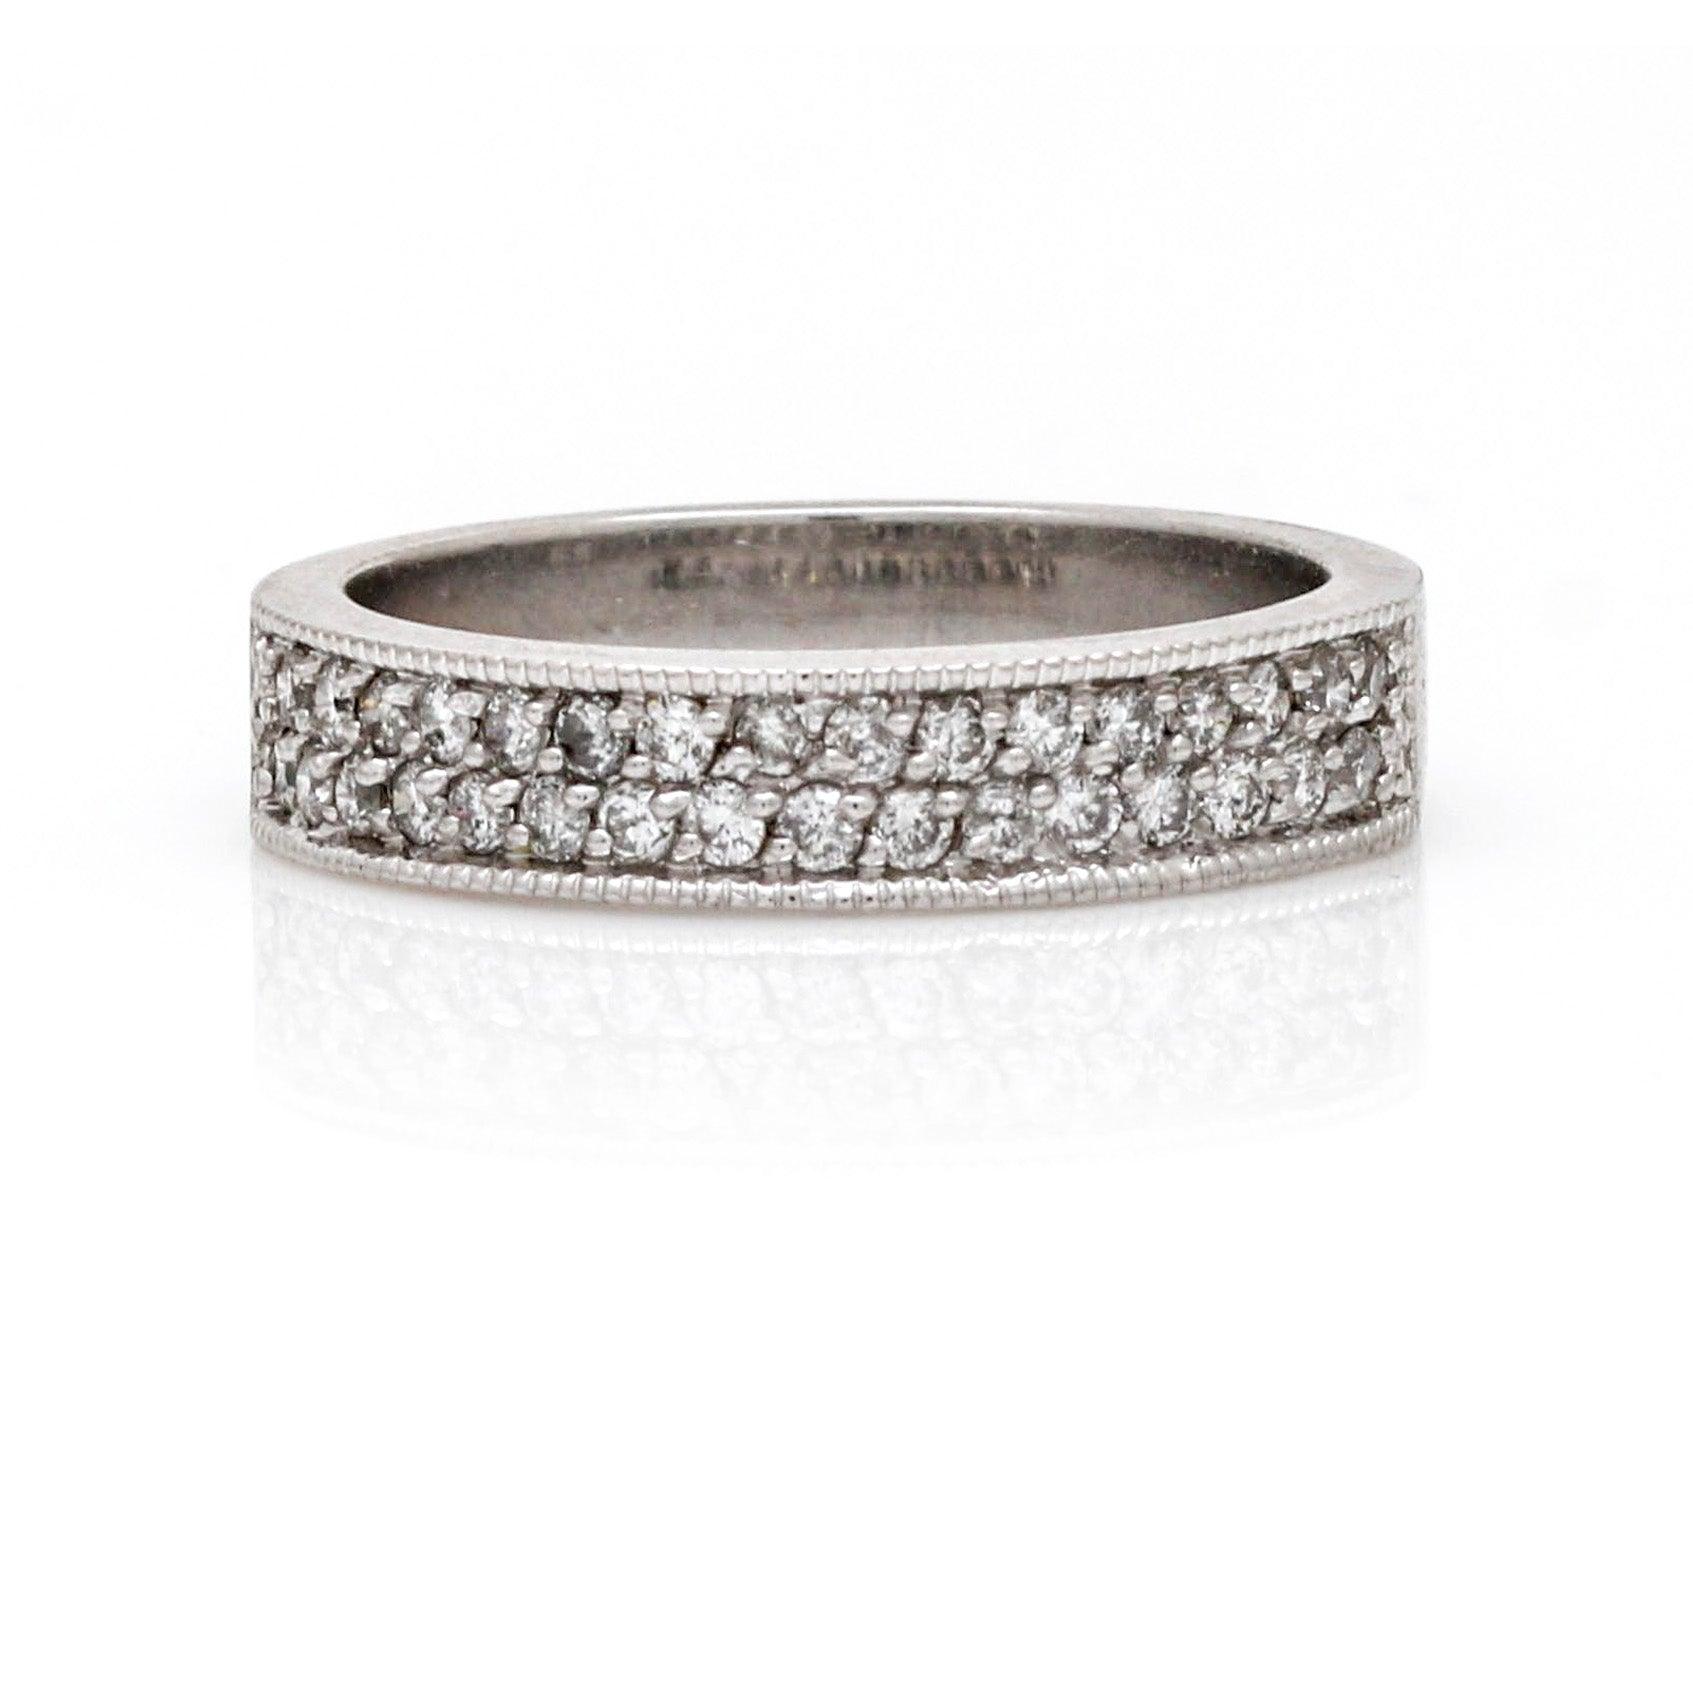 Women's Pave Diamond Ring in 18k White Gold Half-Eternity Band - 31 Jewels Inc.